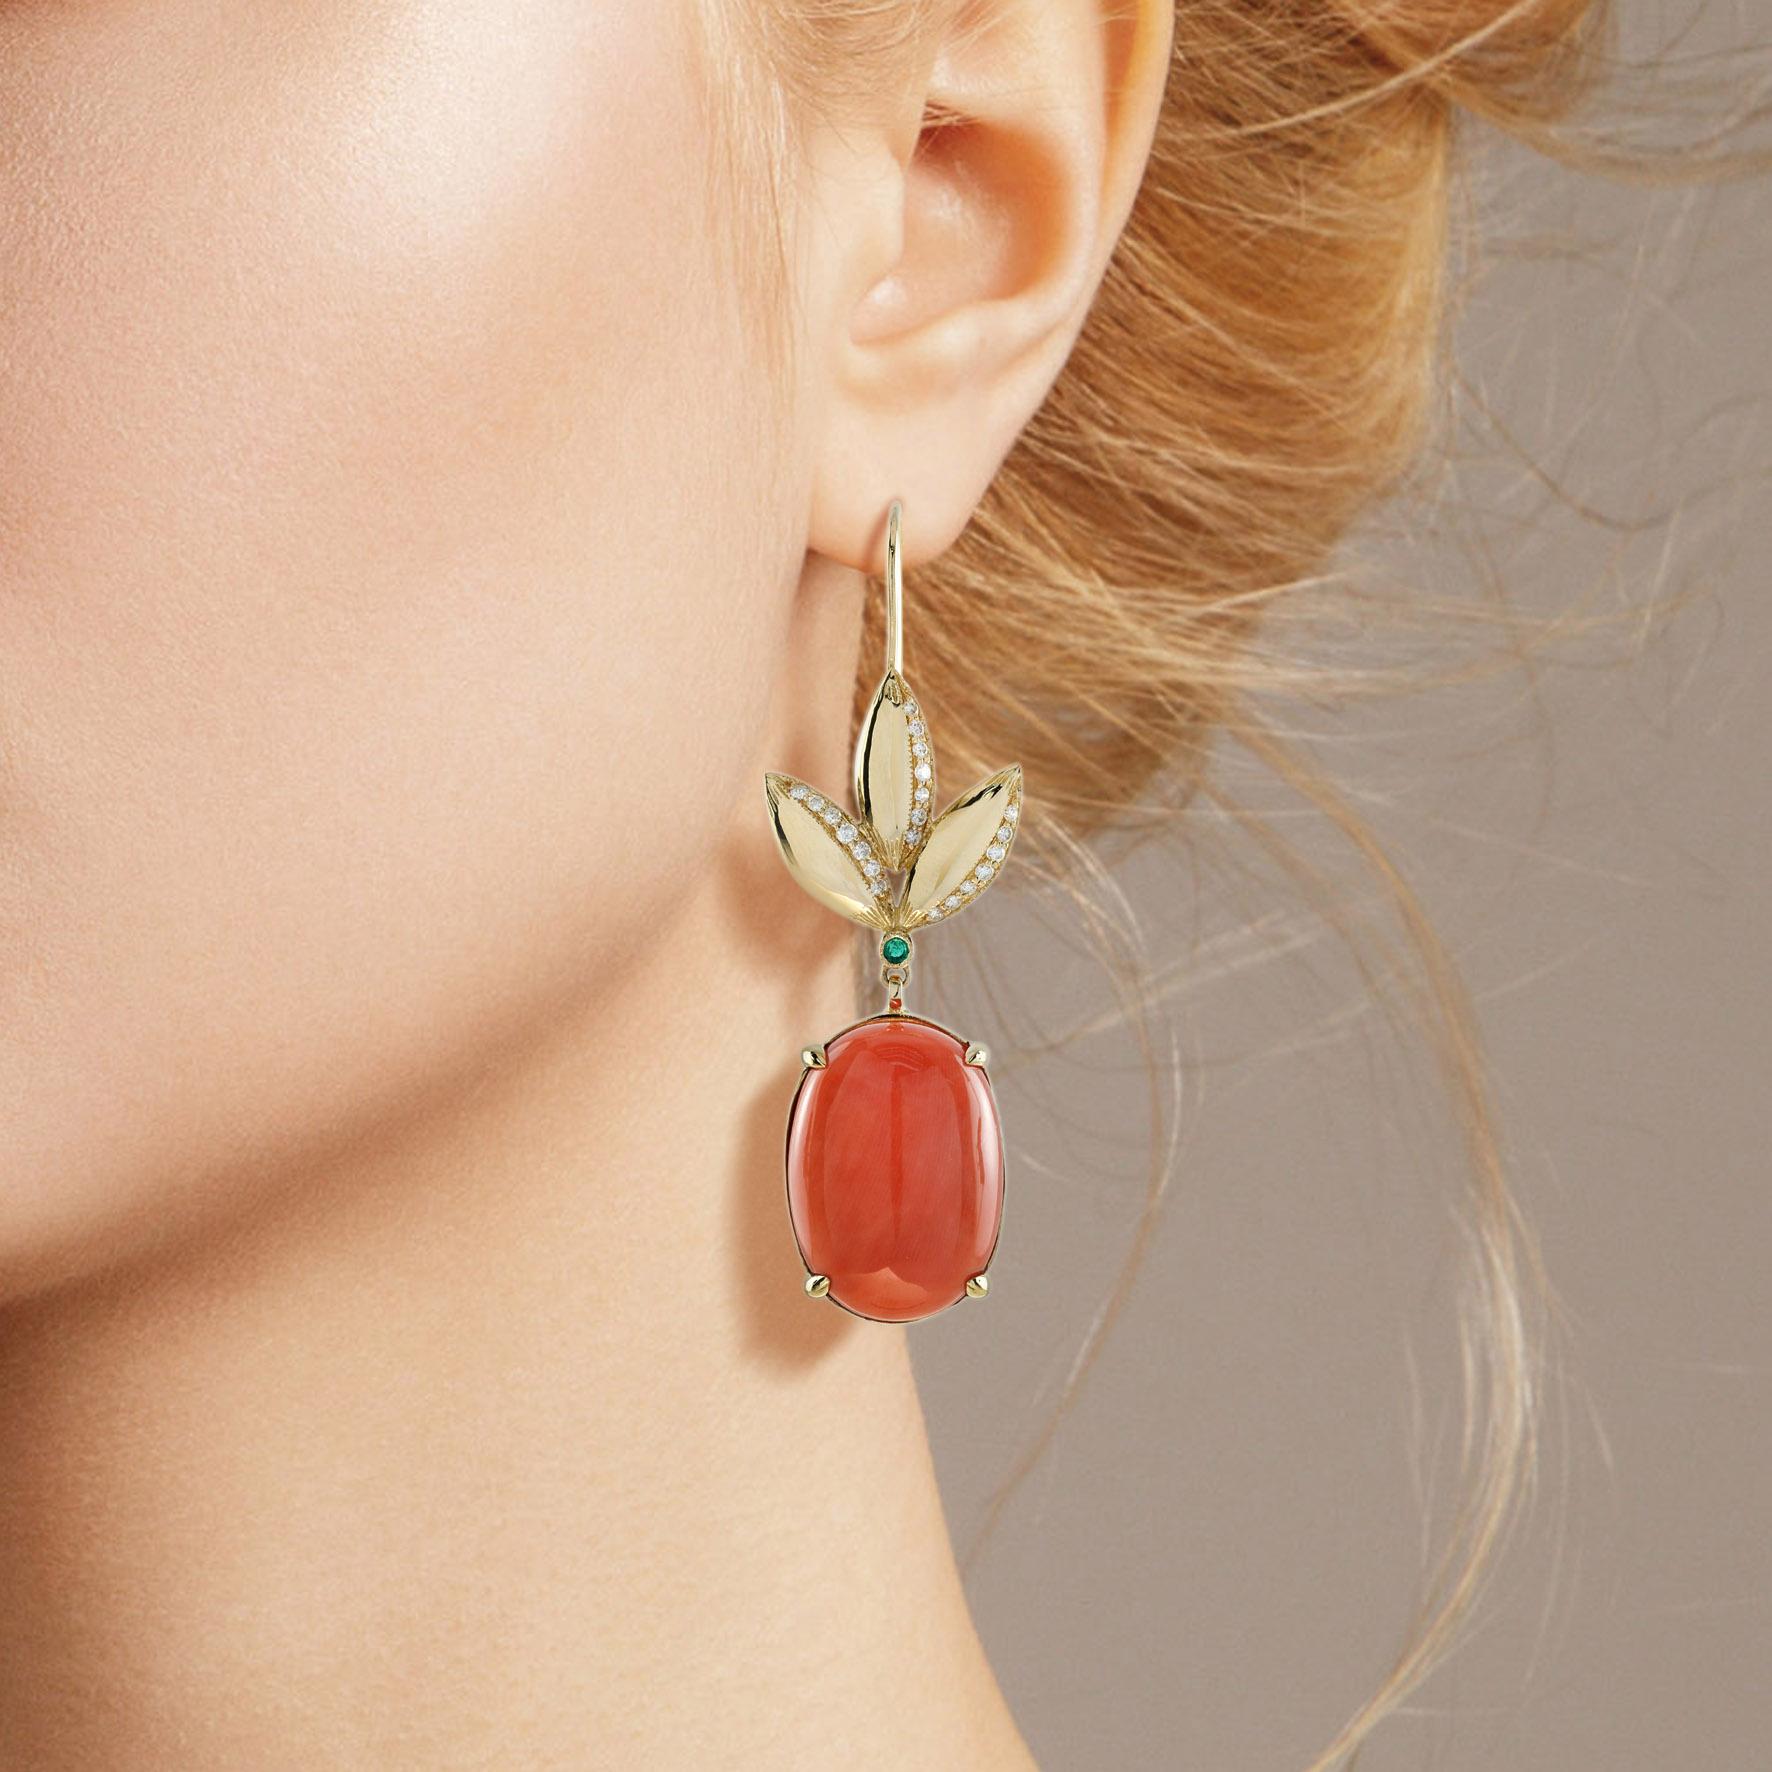 These one of a kind statement earrings are Vintage inspired handcrafted using approximately 28.40 carat oval shape corals. The upper part is decorated with tiny emerald hanging from leaves decorated with shimmering diamonds. Create your signature